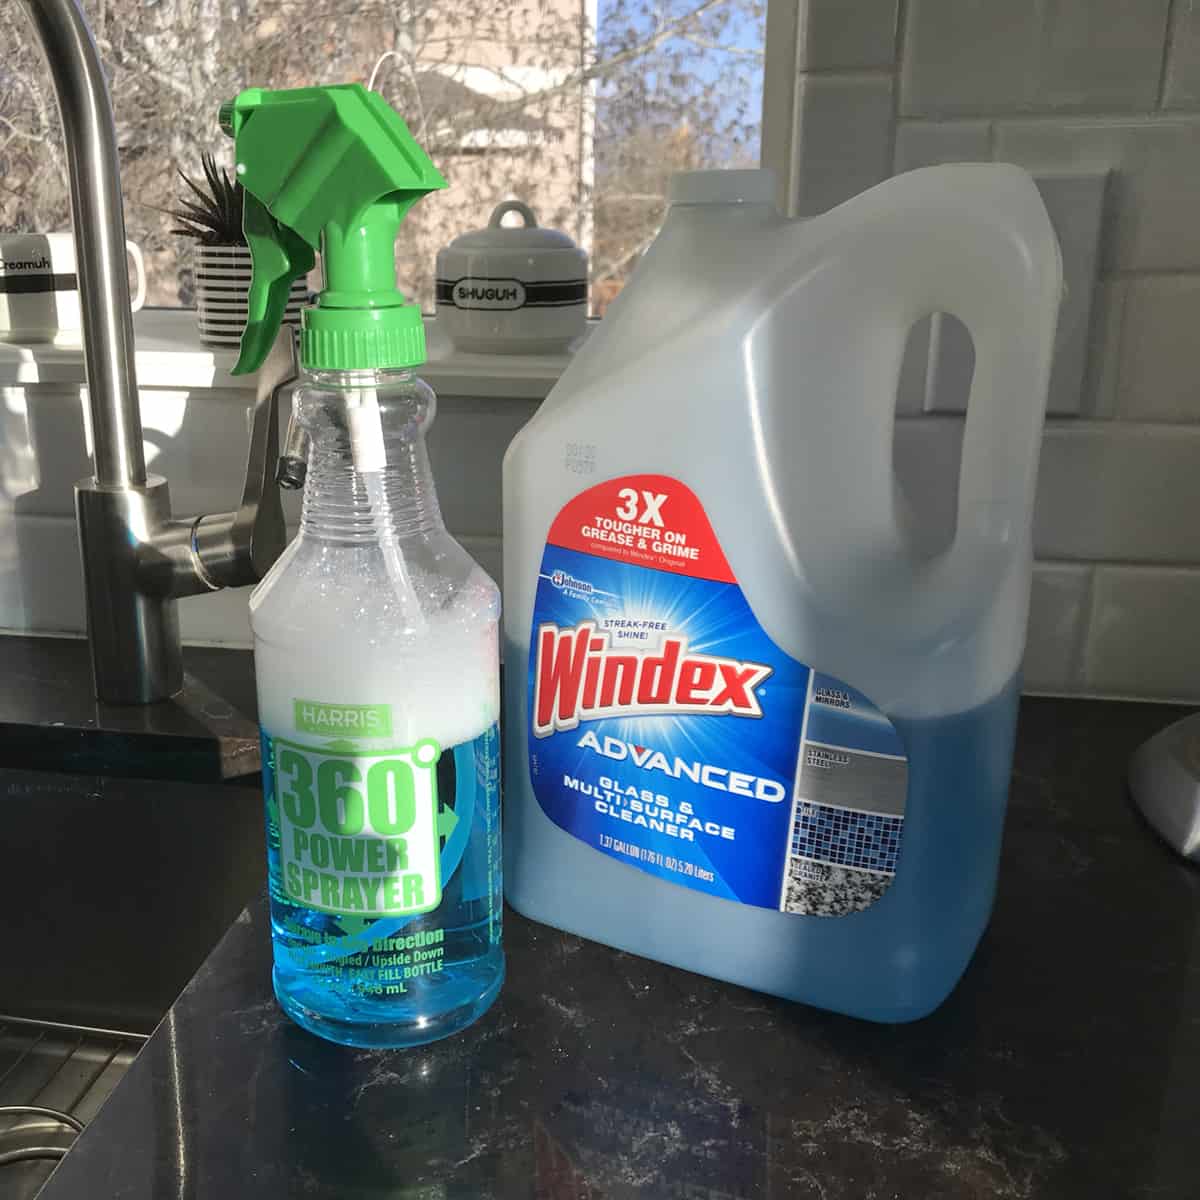 Ways To Use Windex That Will Make You